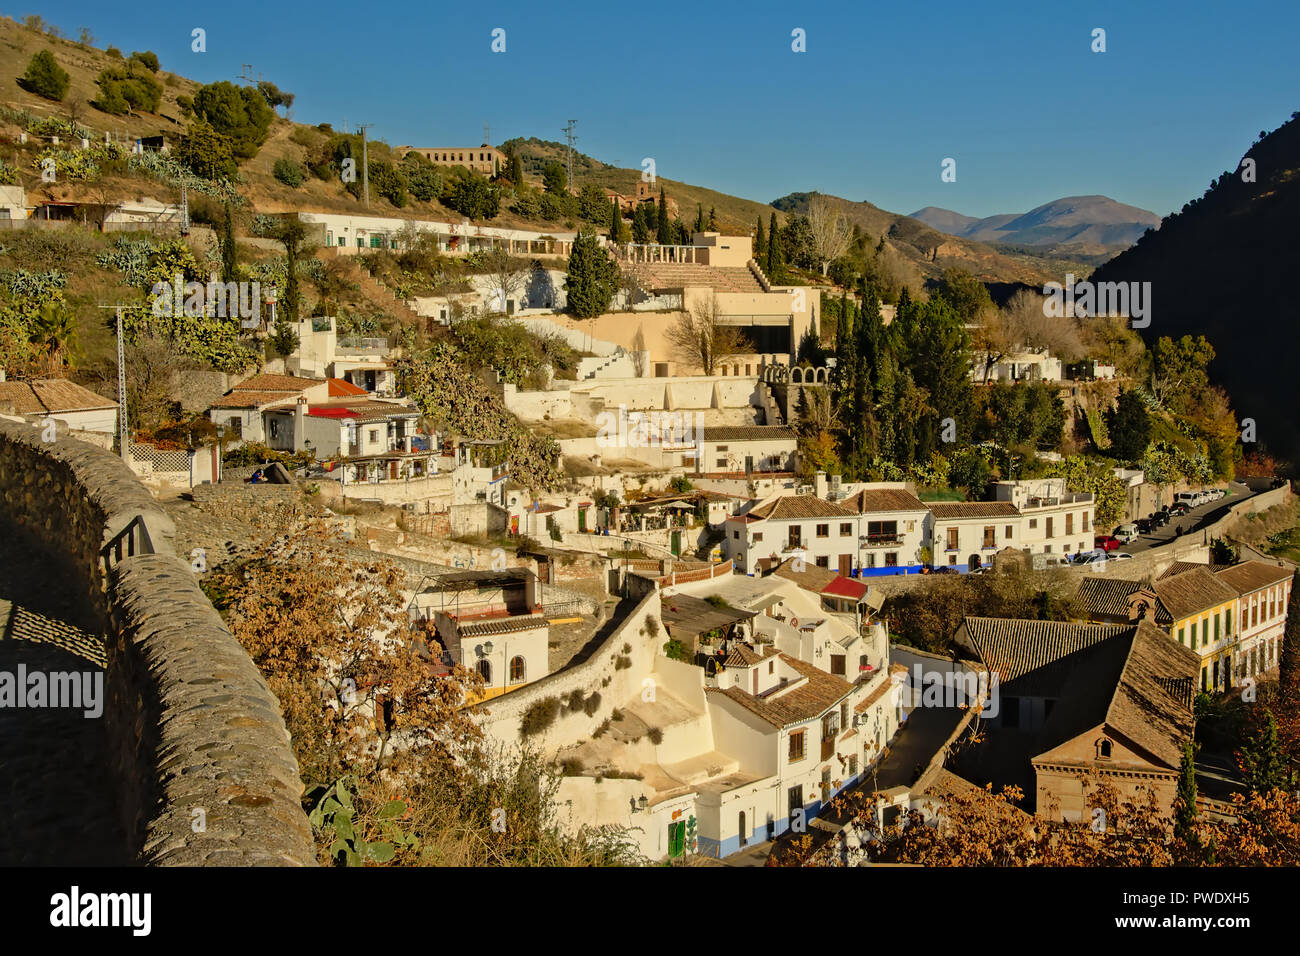 White houses on the hill slopes of Albayzin neighbourhood, Granada, aerial view Stock Photo